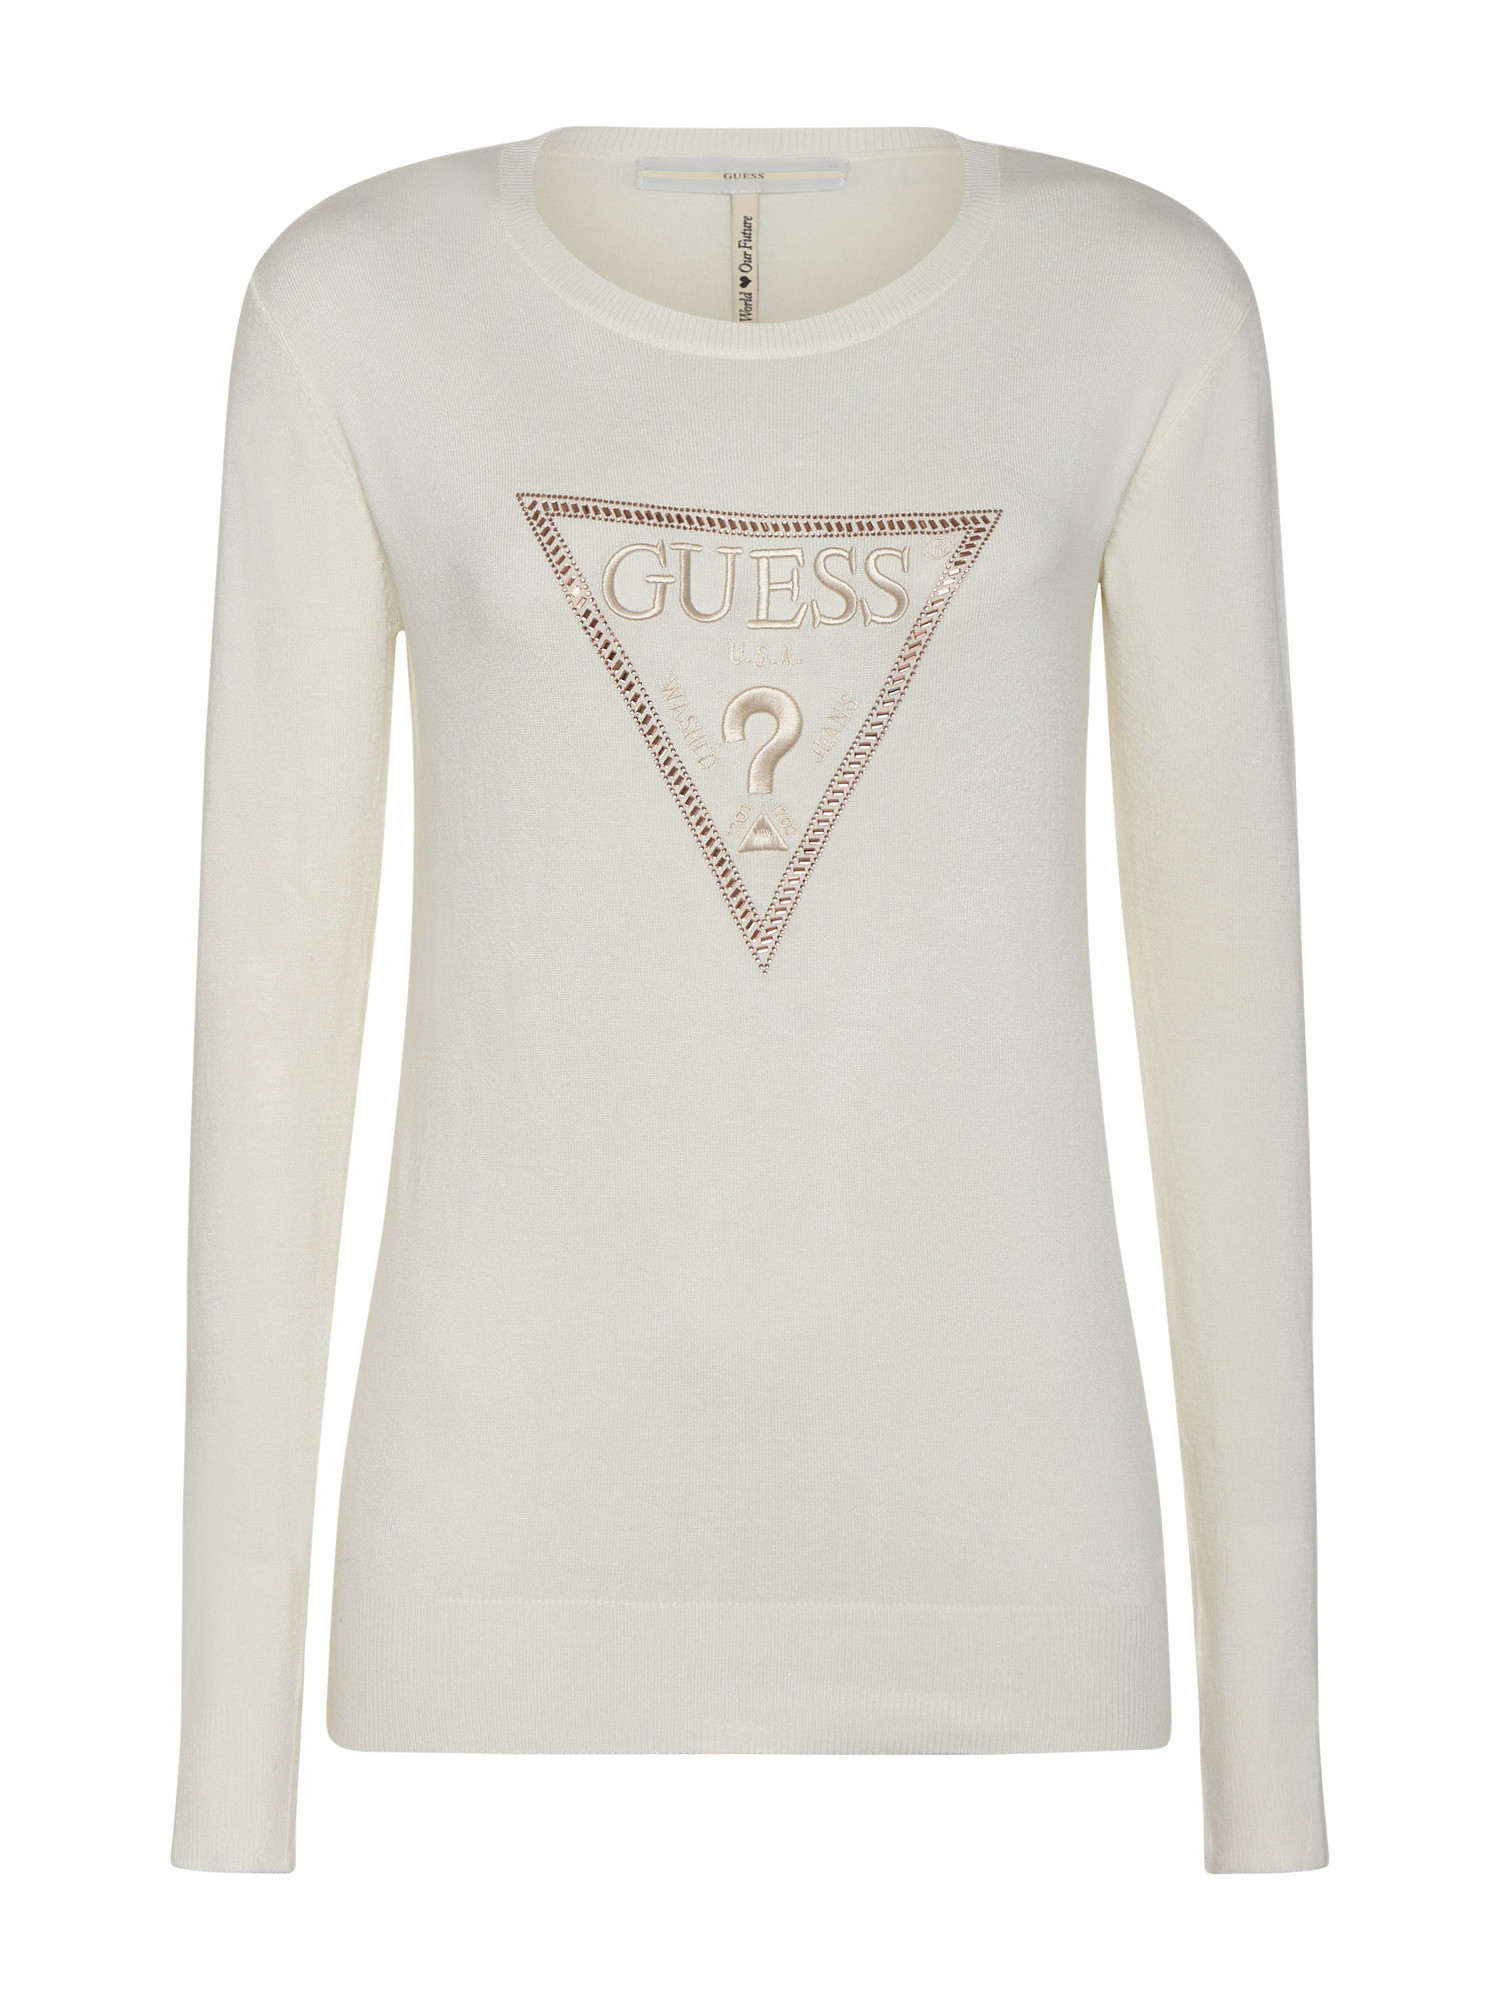 Guess - Maglia con logo, Crema, large image number 0